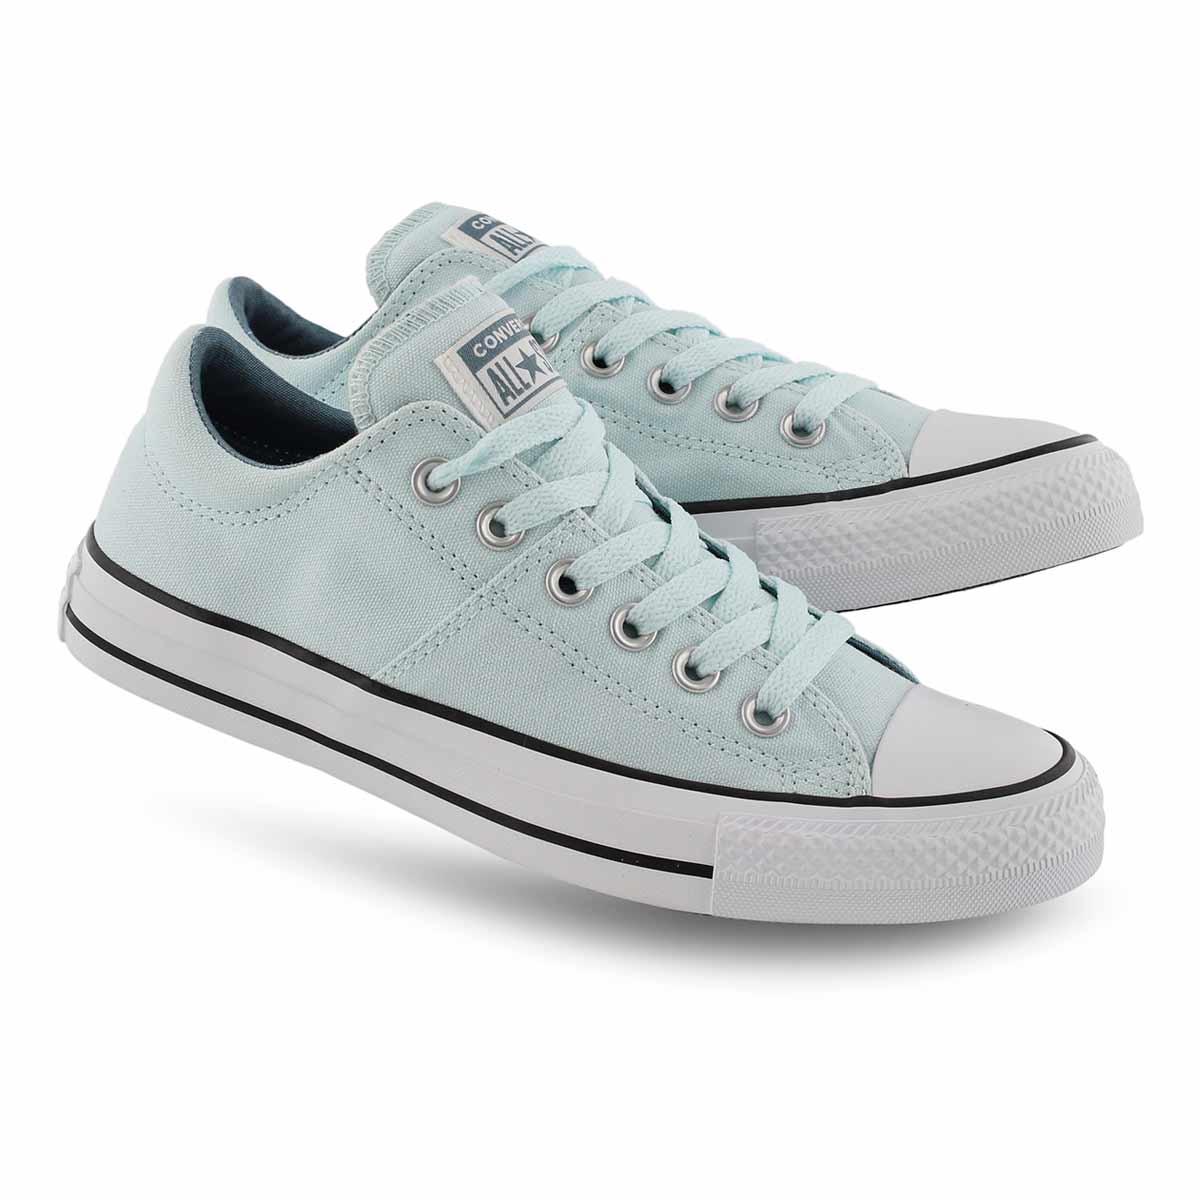 chuck taylor all star madison oxford sneaker